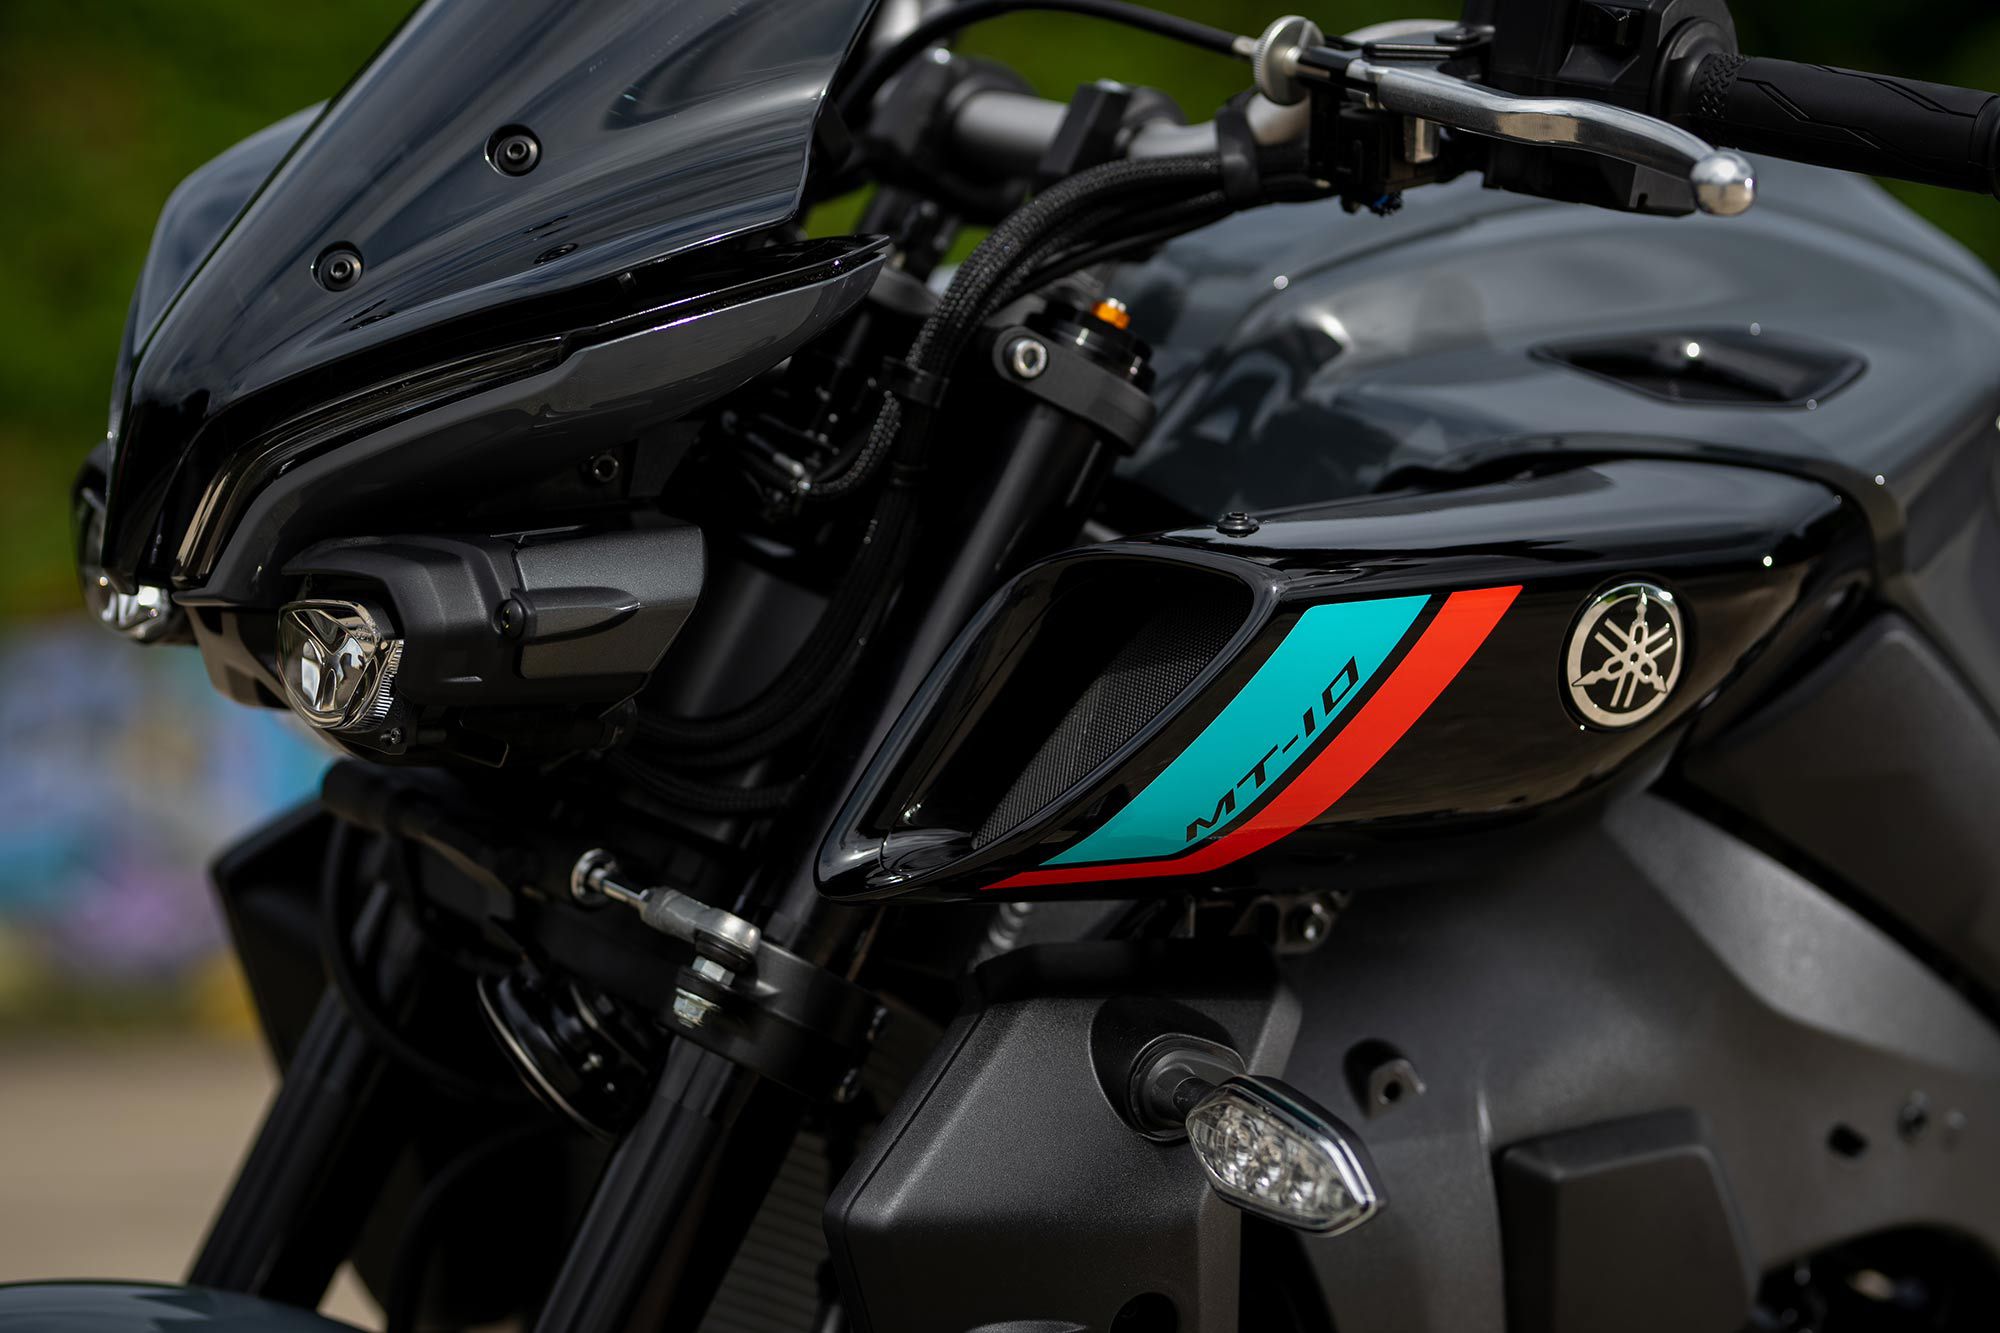 Real ram air scoops feed the 998cc inline four. We love the intake roar of the MT-10 while riding.